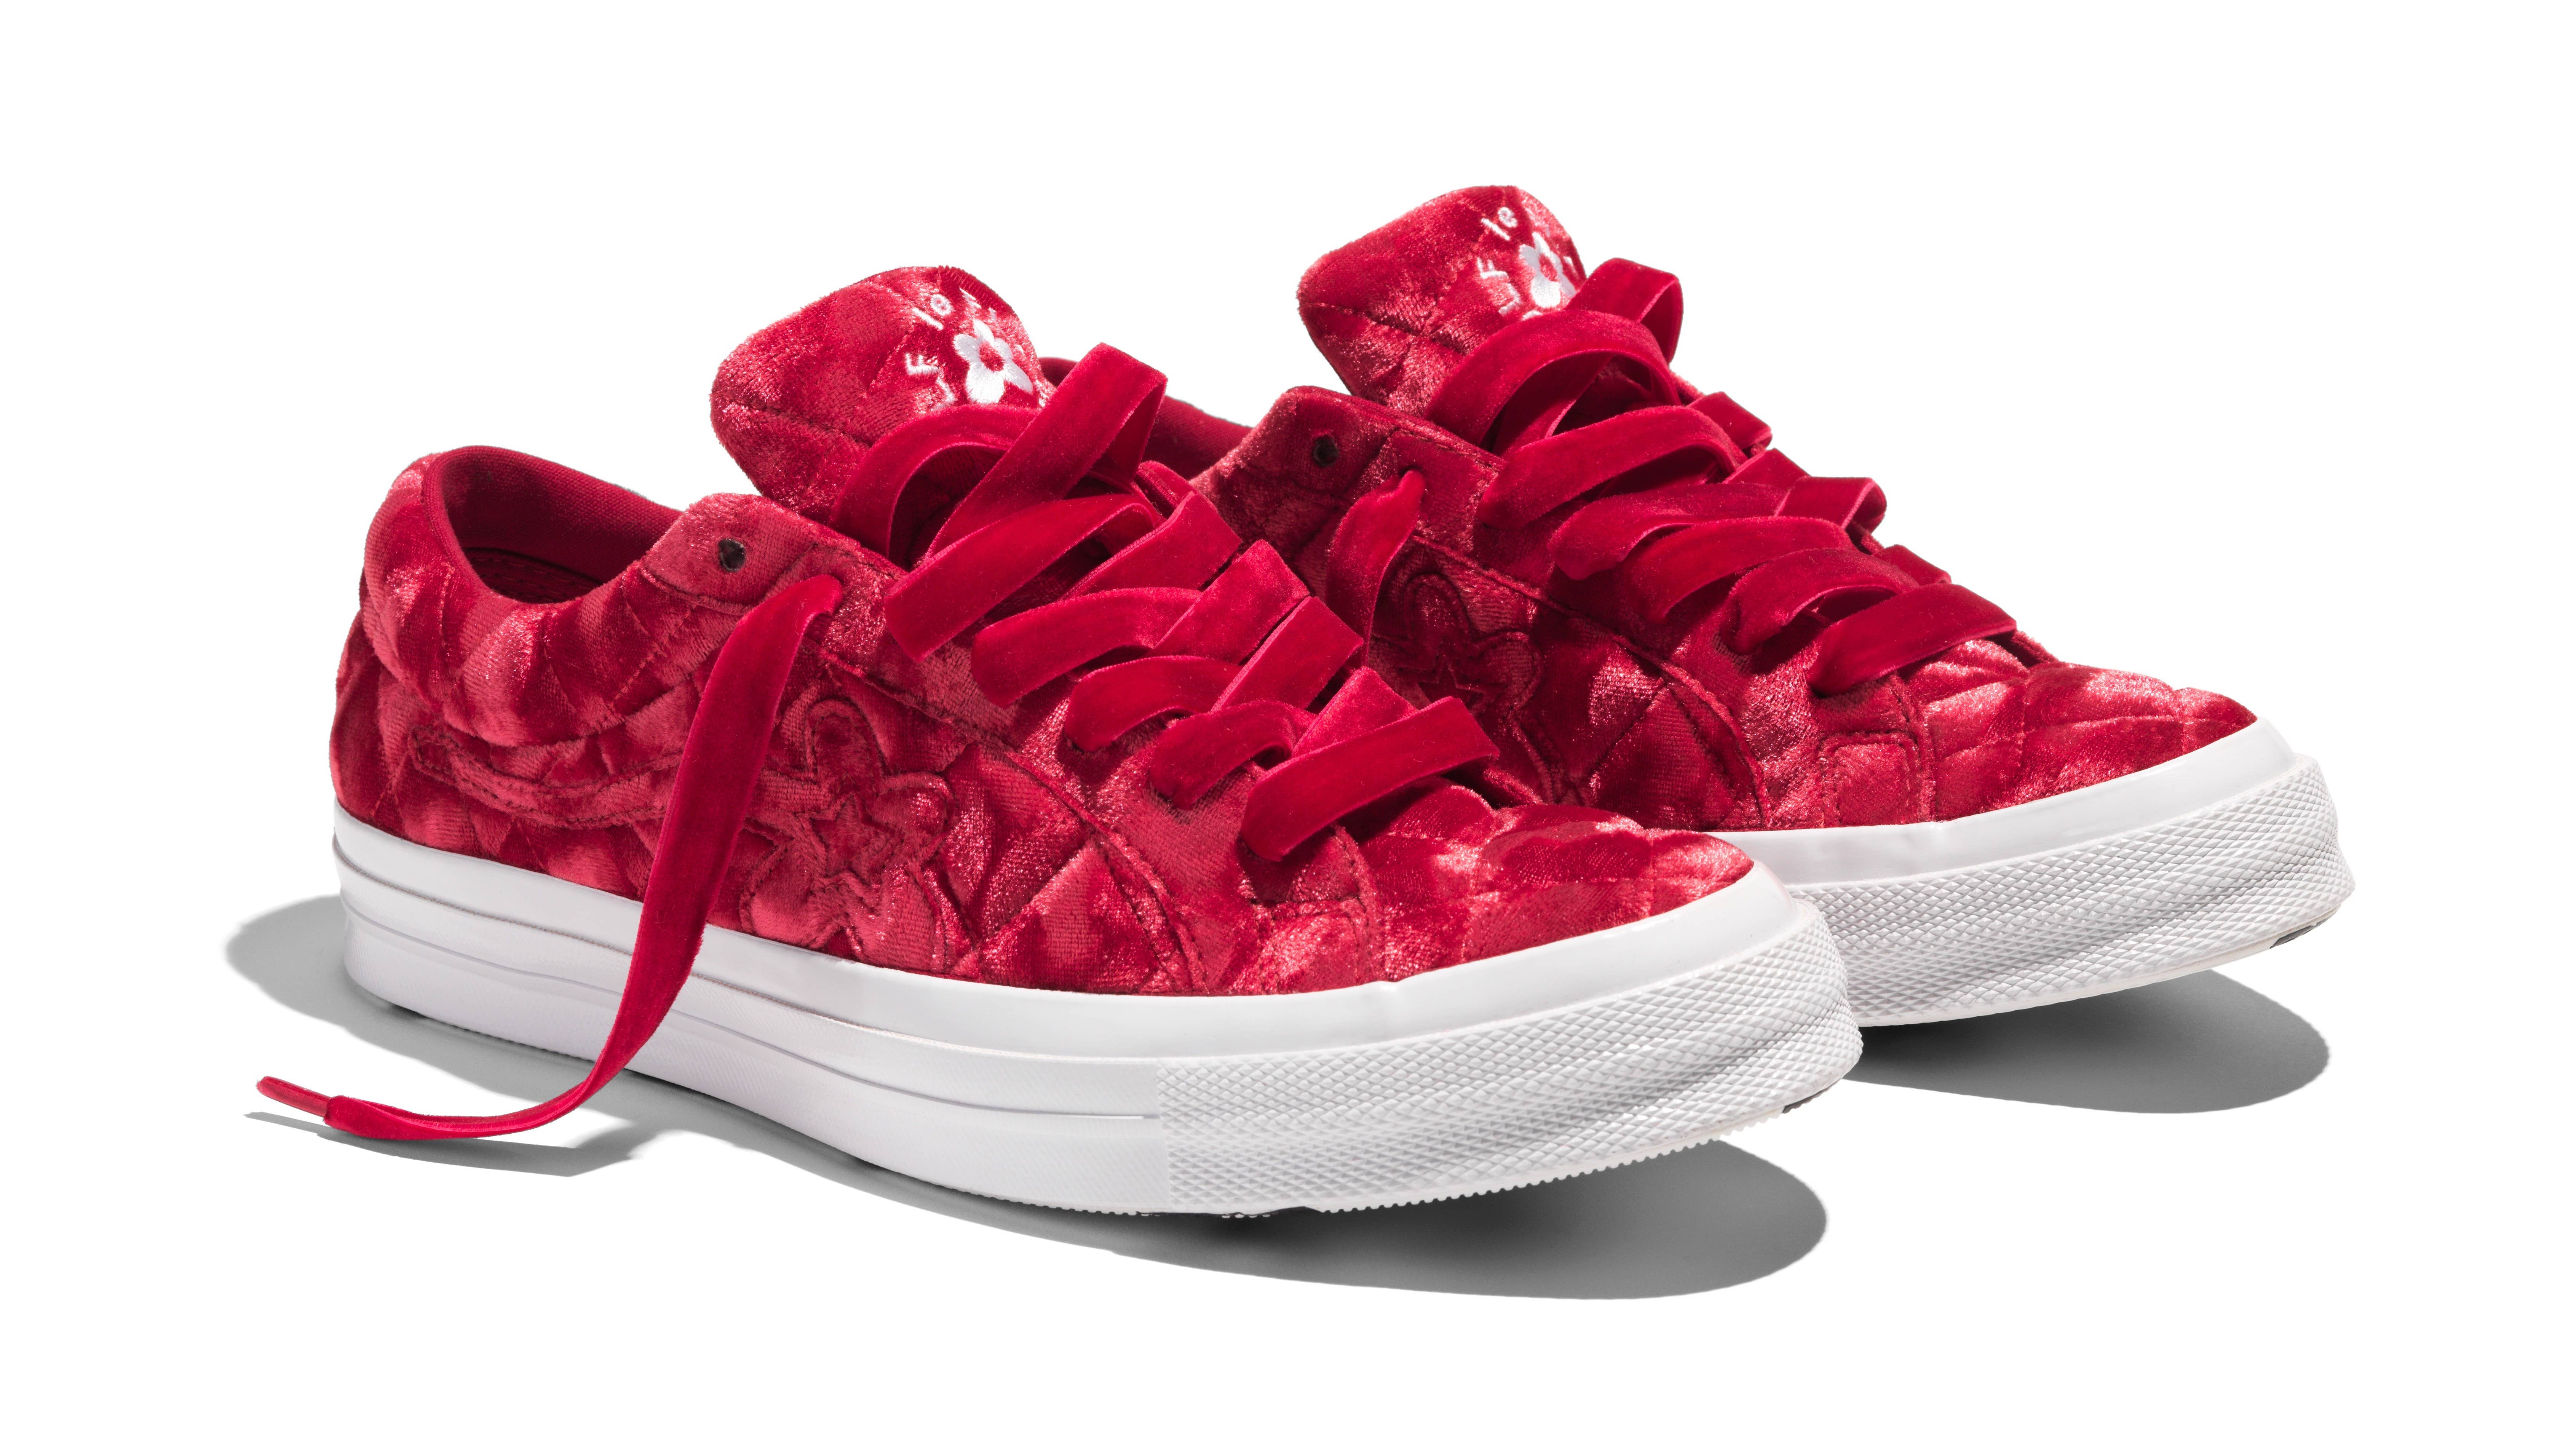 Converse x Golf Le Fleur 'Quilted Velvet' (Red)